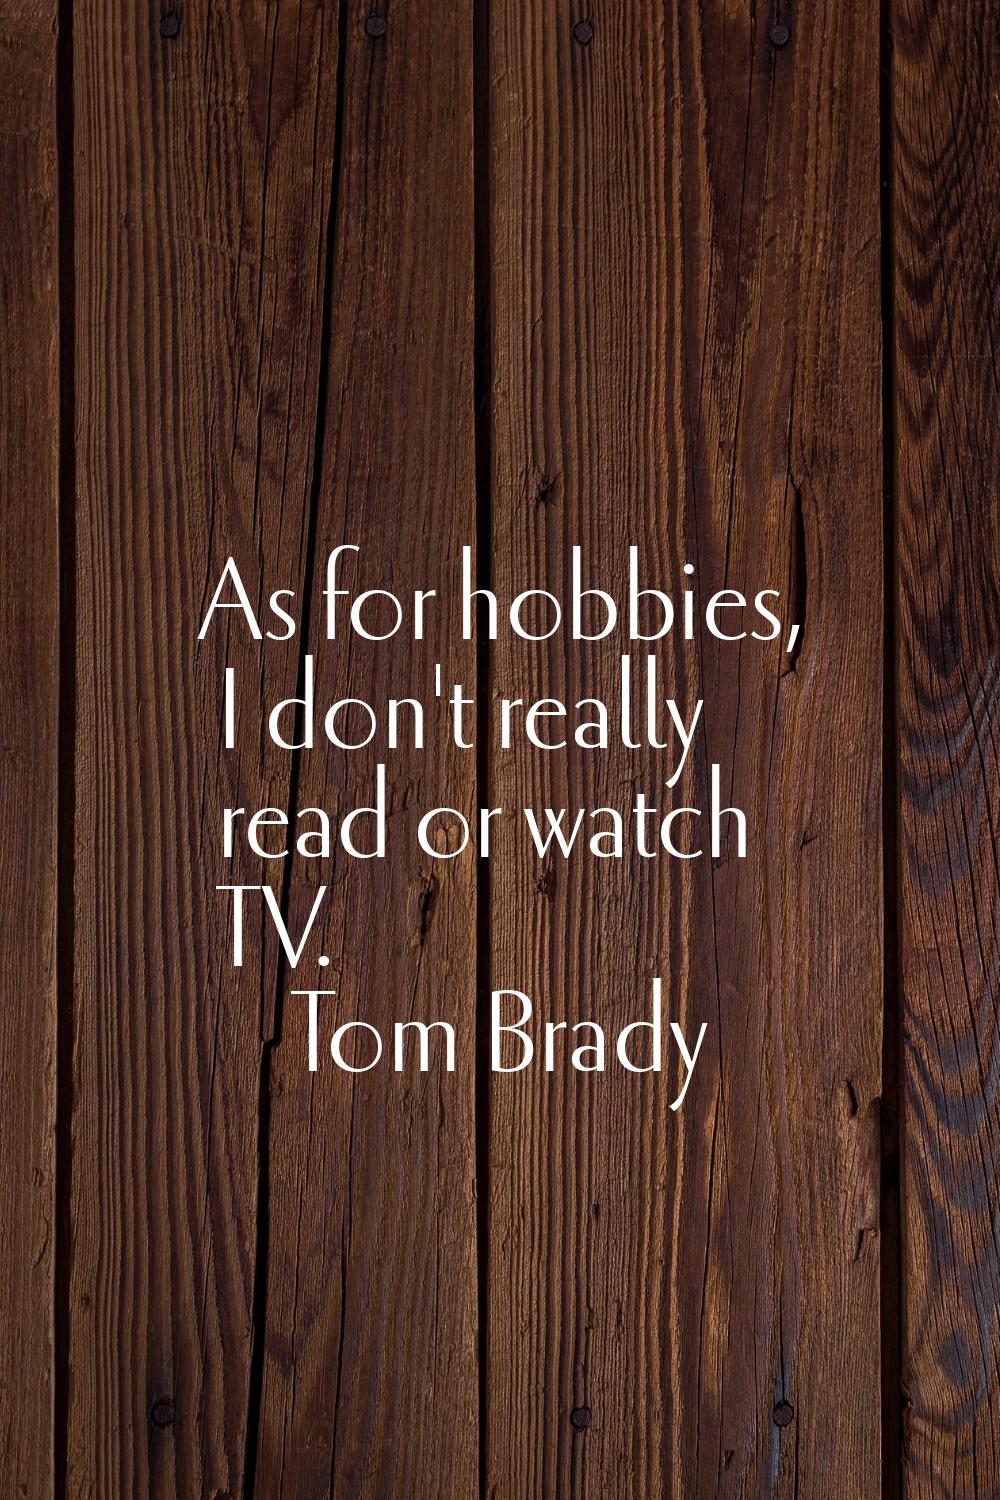 As for hobbies, I don't really read or watch TV.